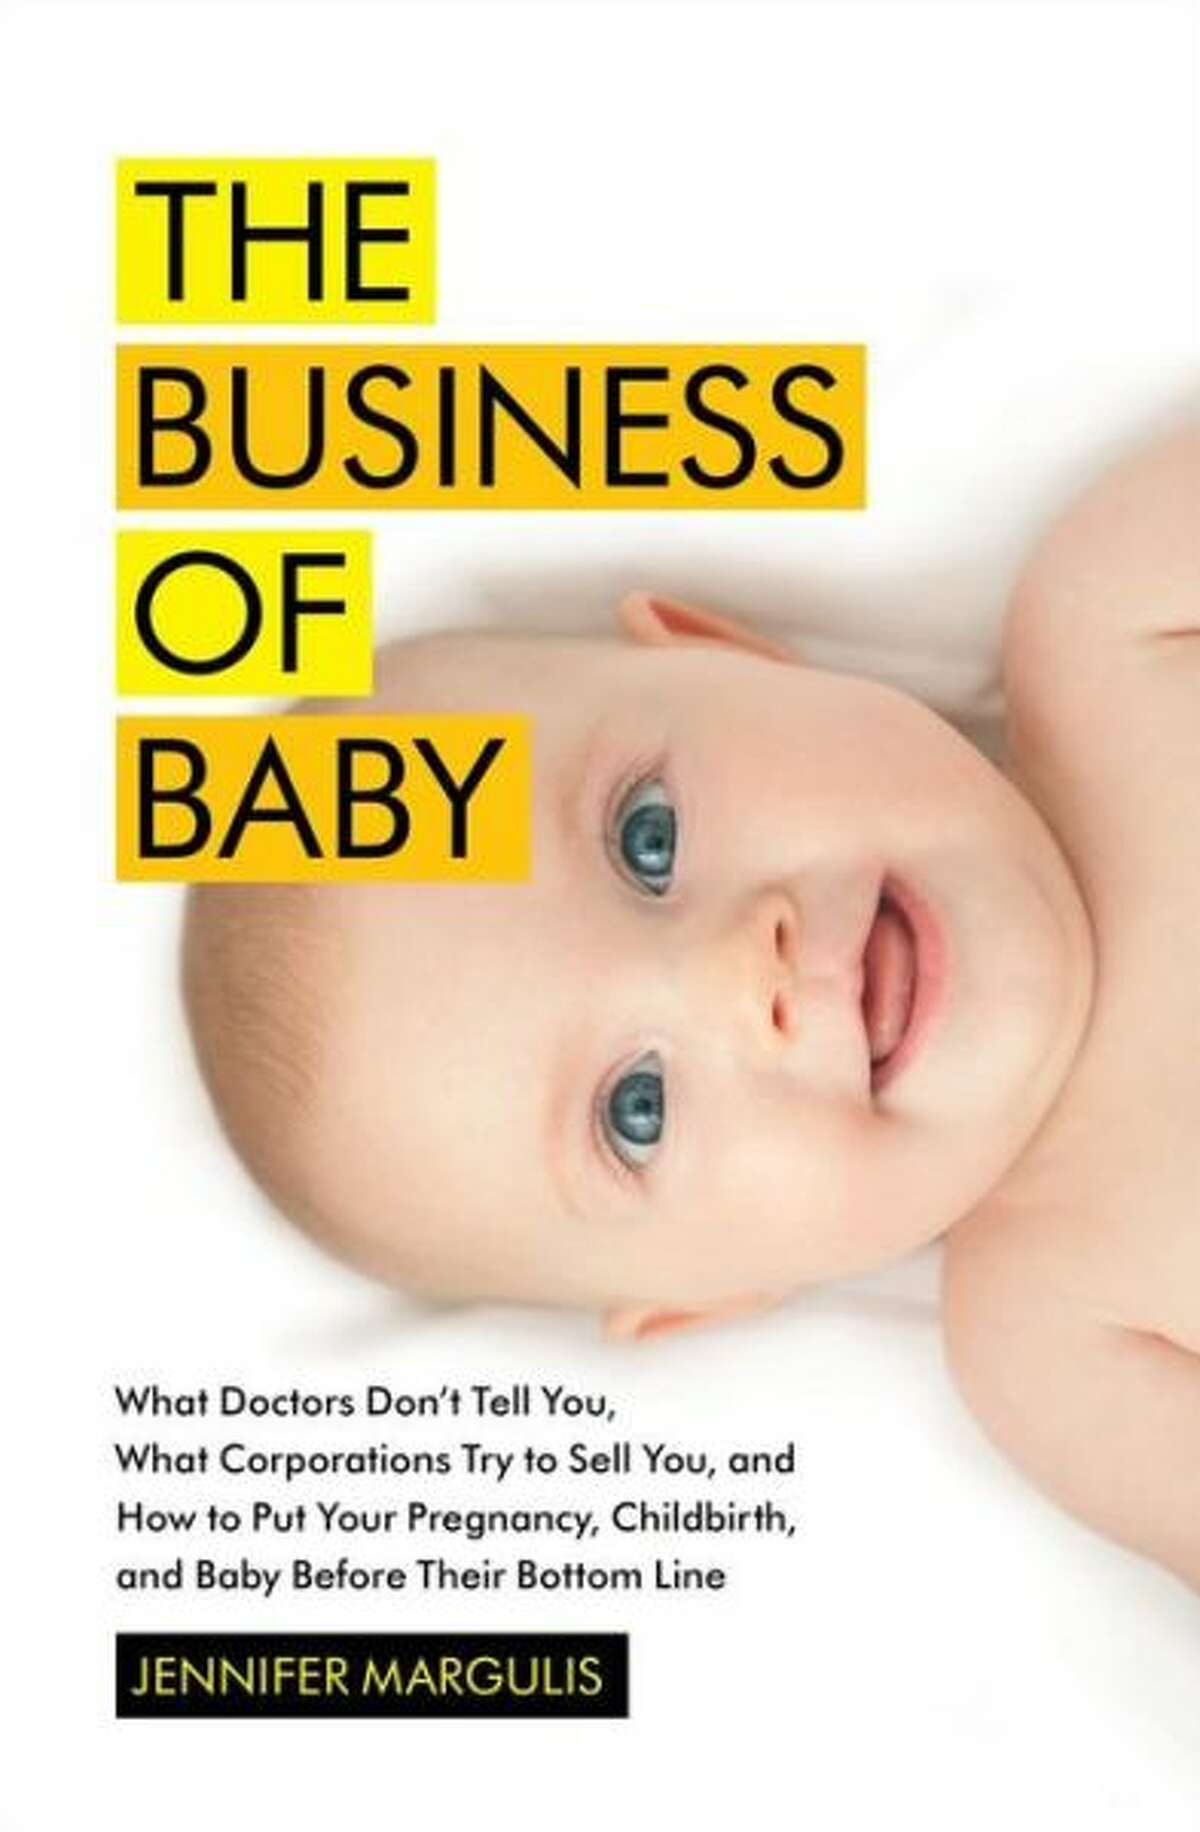 "The Business of Baby" by Jennifer Margulis